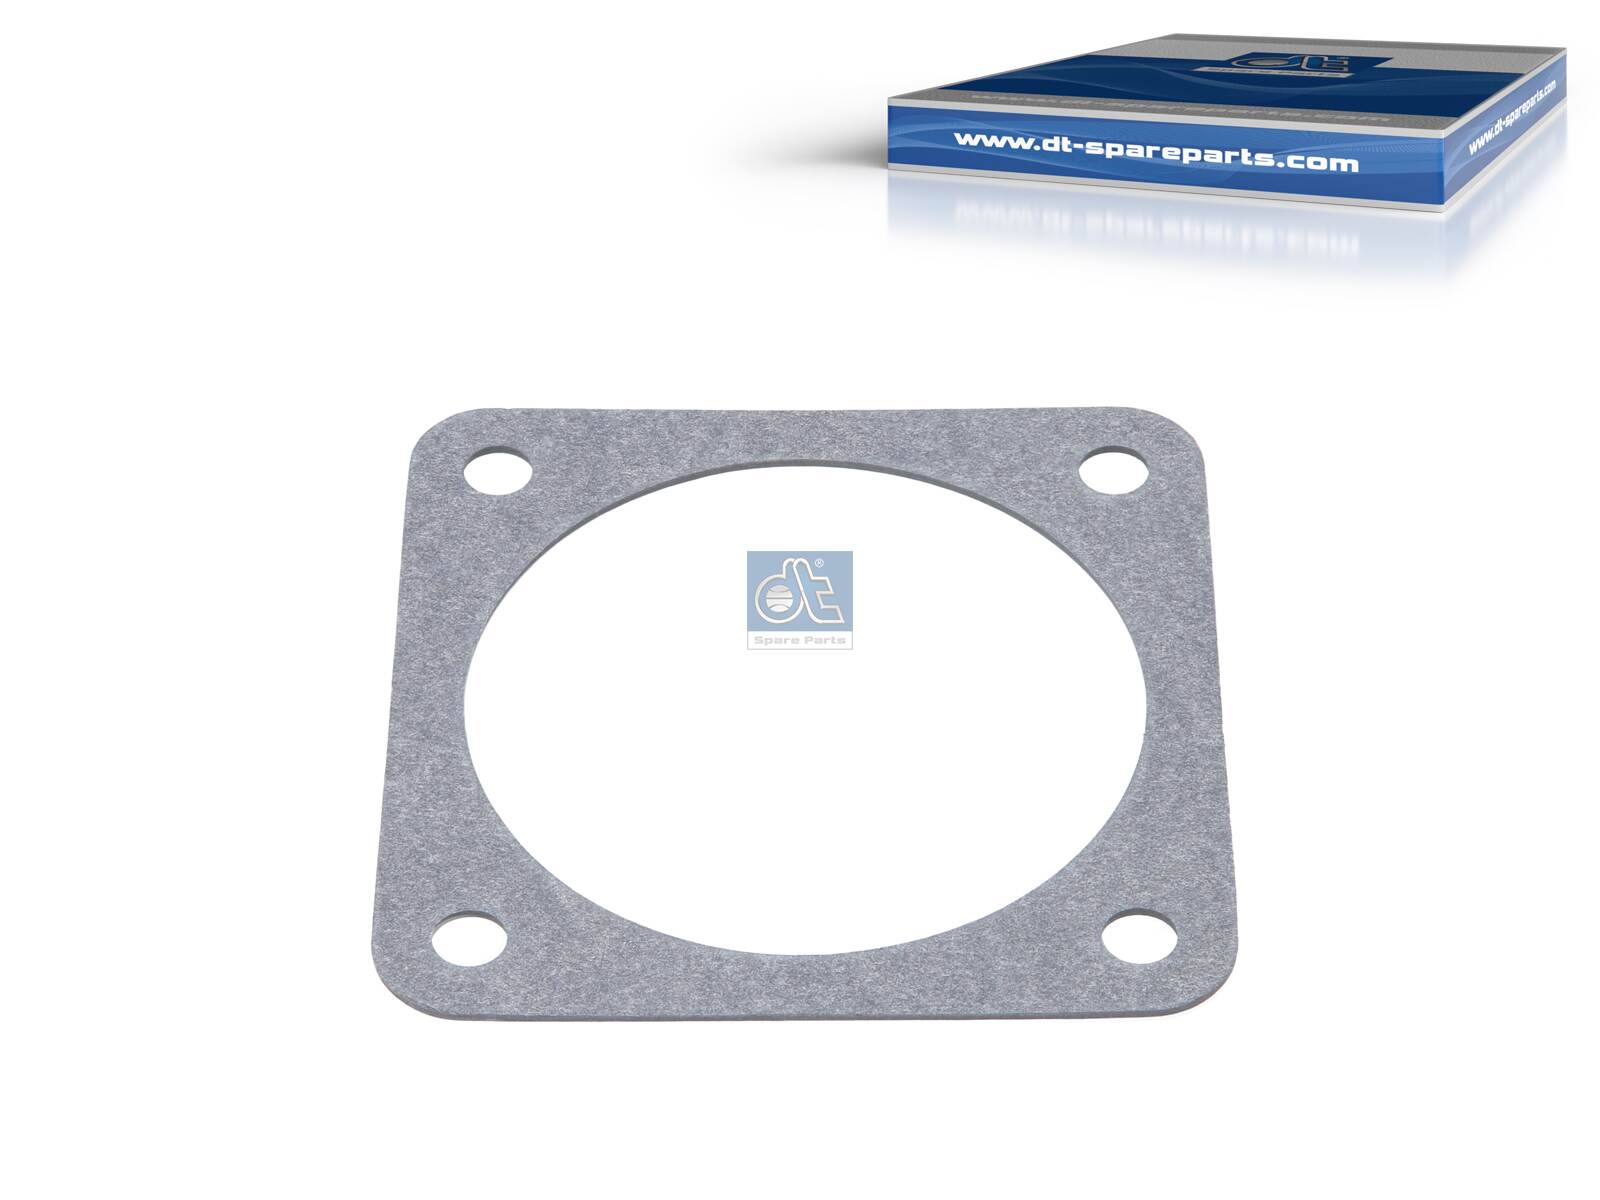 Gasket, intake manifold housing - 4.20879 DT Spare Parts - 4570980080, A4570980080, 0490591